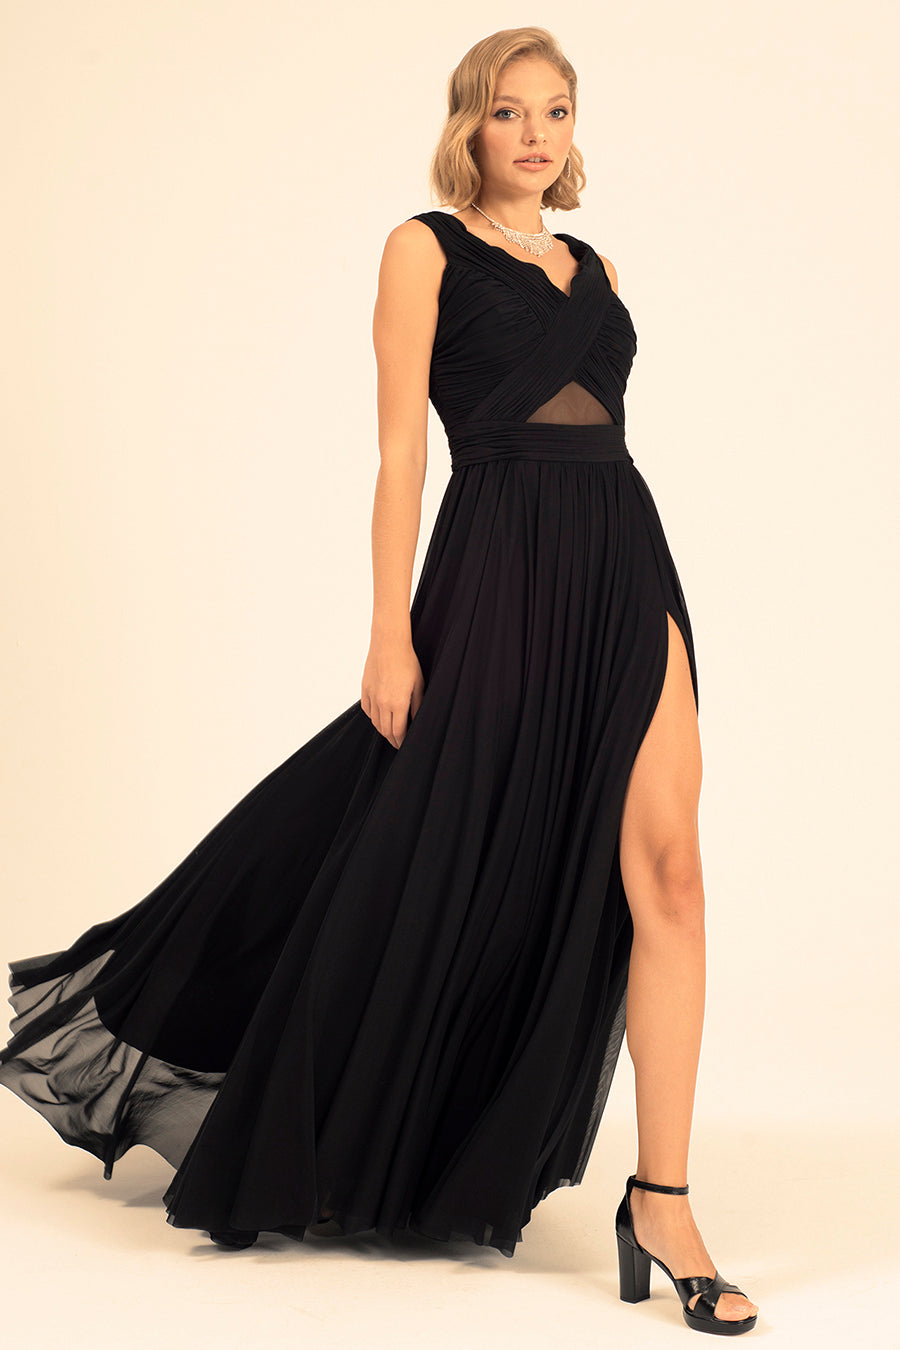 Vicky - Mystic Evenings | Evening and Prom Dresses